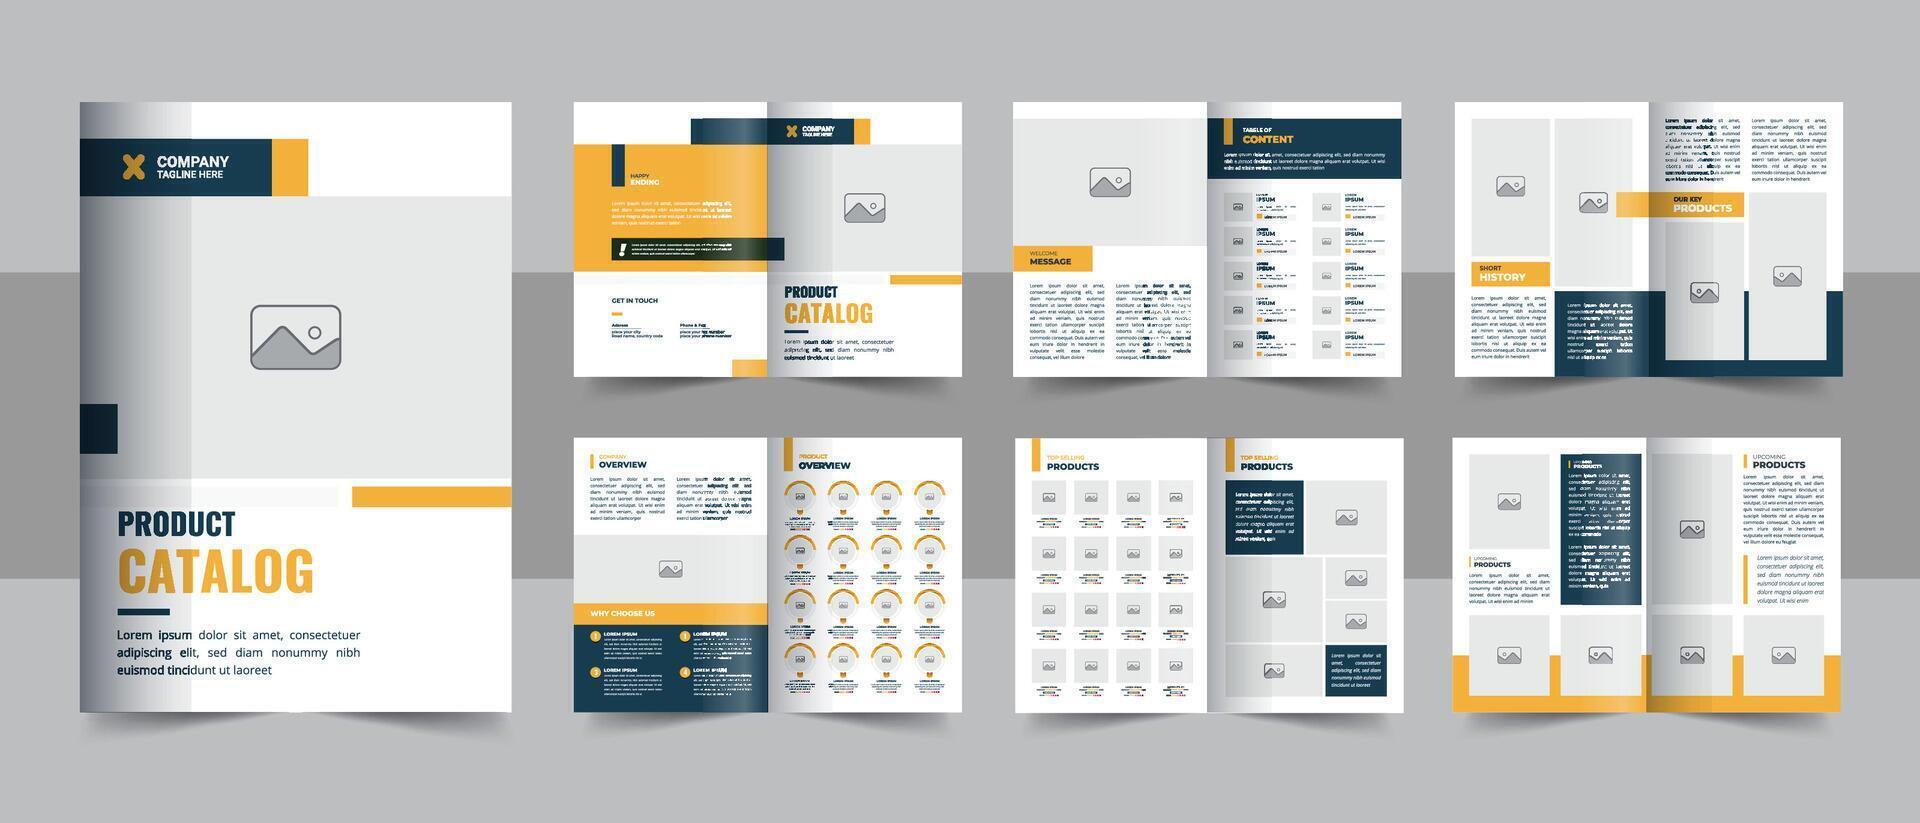 Product catalogus ontwerp of modern Product catalogus sjabloon, bedrijf Product catalogus portefeuille lay-out met Product lijst vector